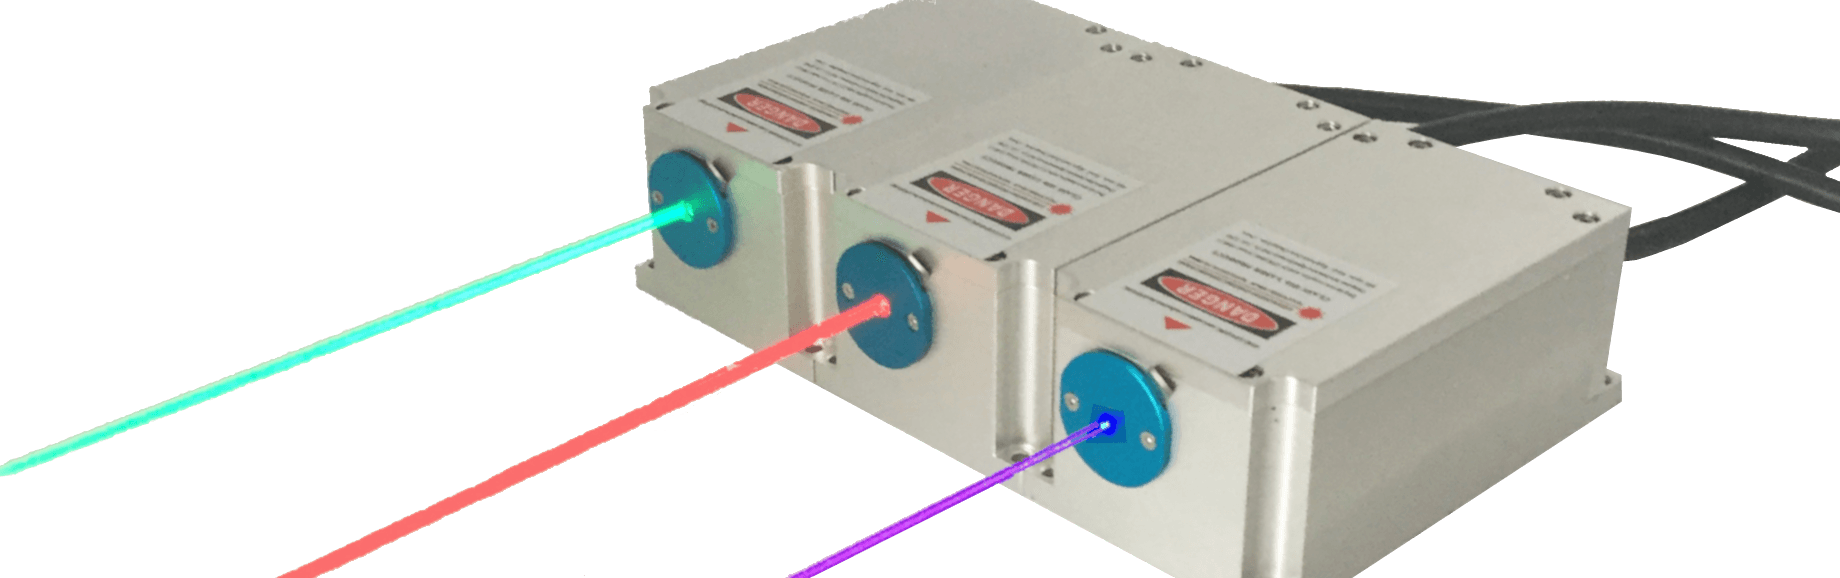 CW, DPSS, q-switch, single frequency, diode laser, fiber coupled, OEM